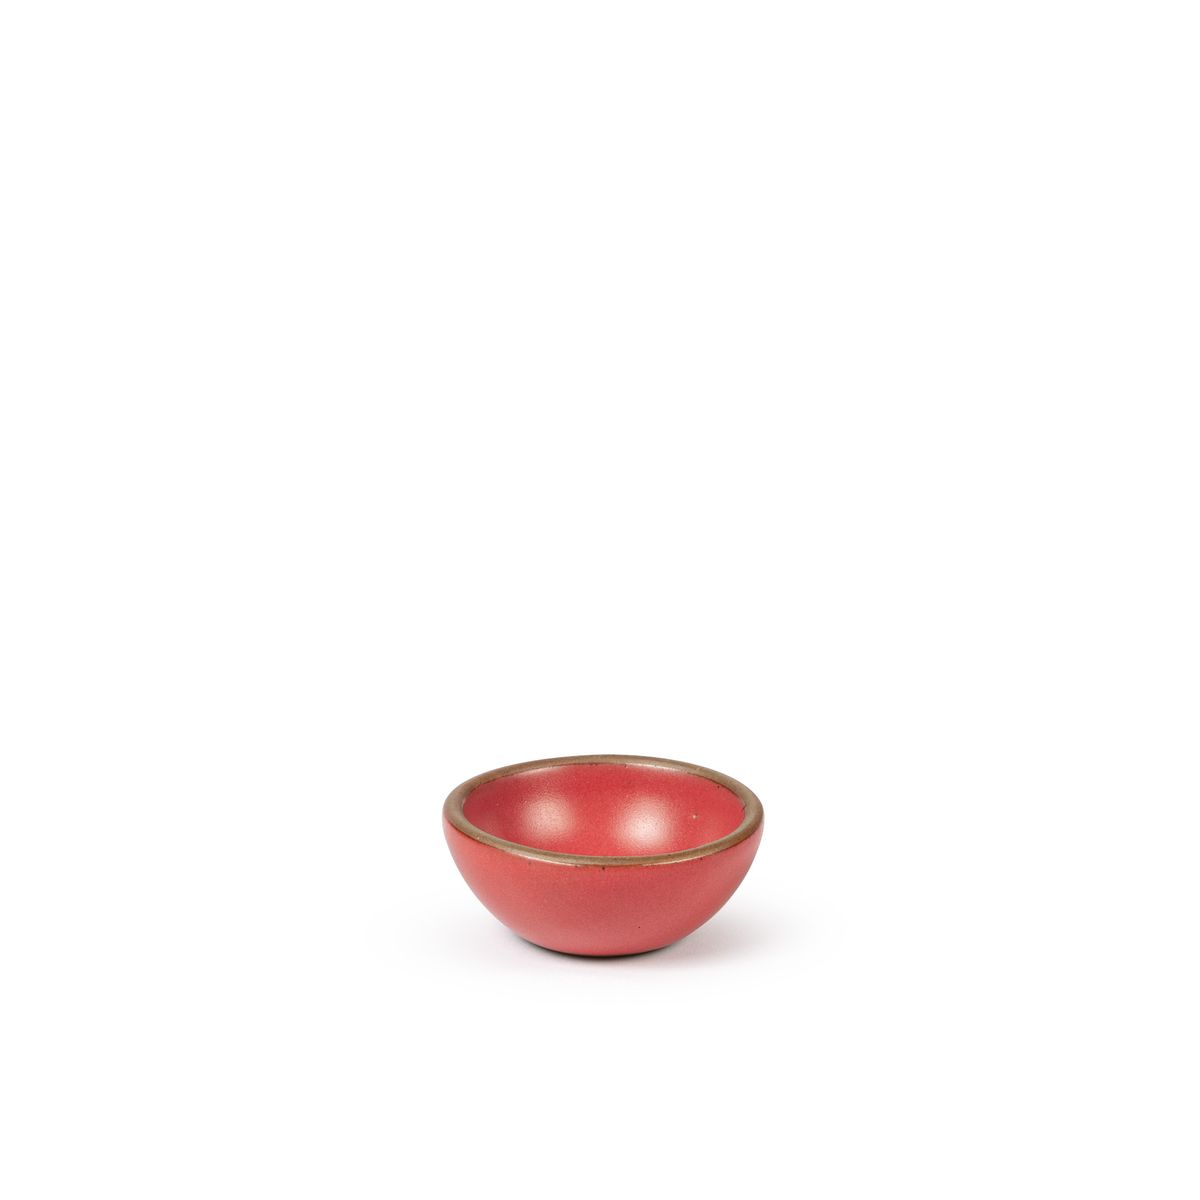 A tiny rounded ceramic bowl in a bold red color featuring iron speckles and an unglazed rim